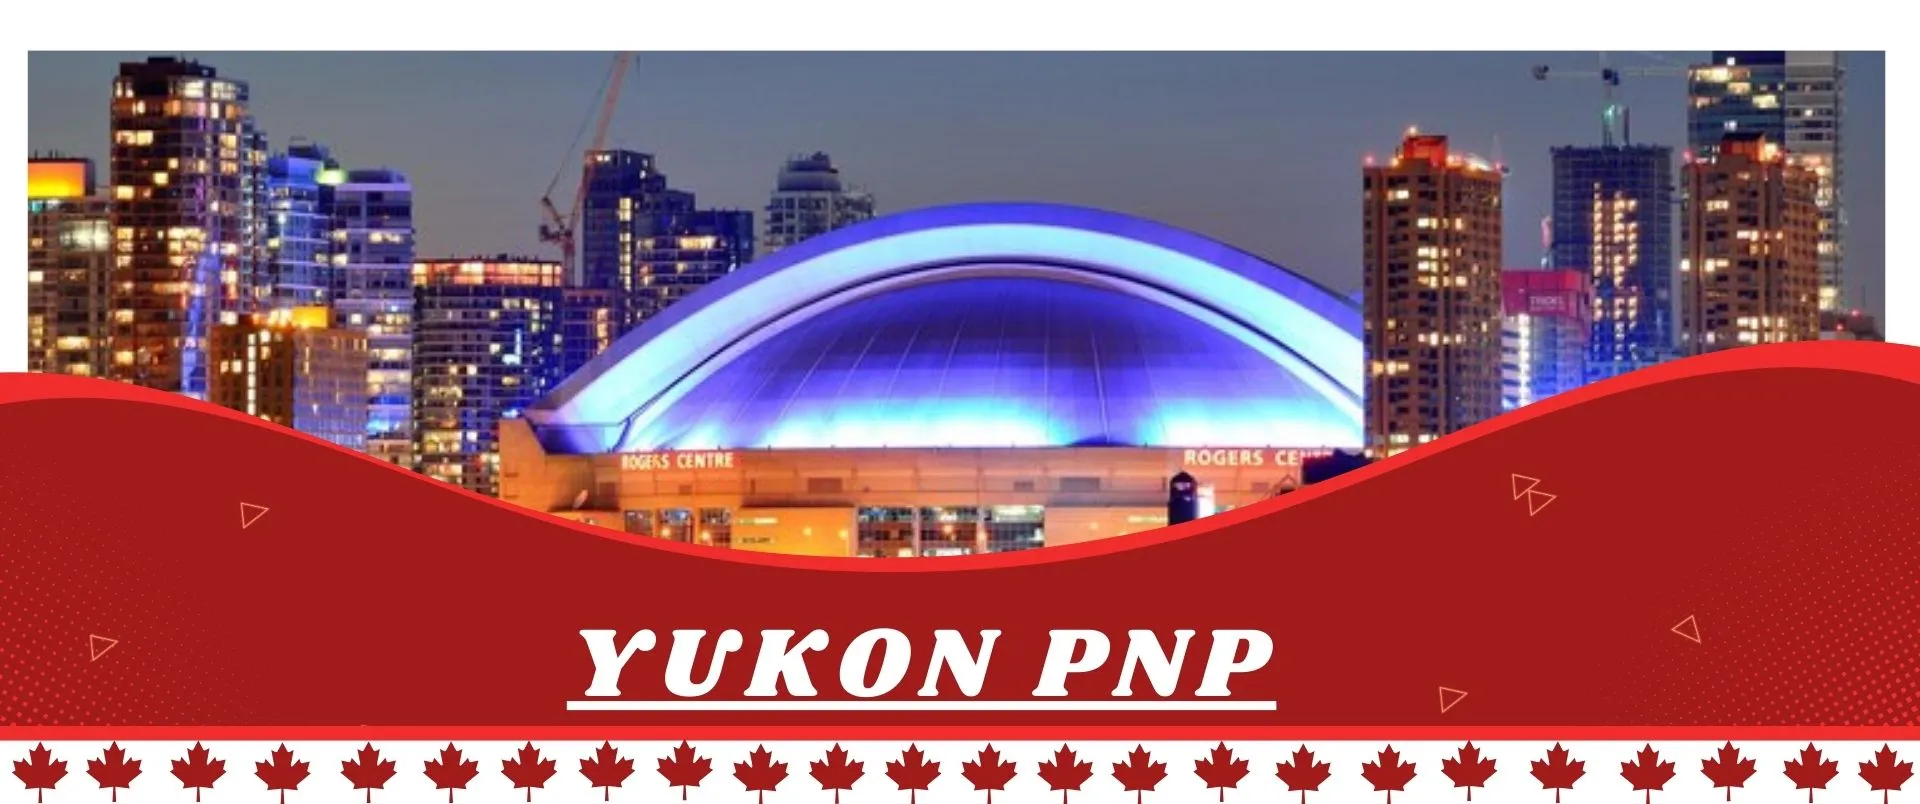 Yukon PNP Canada Buildings with Lights in Dark Sky designed by isha immigration